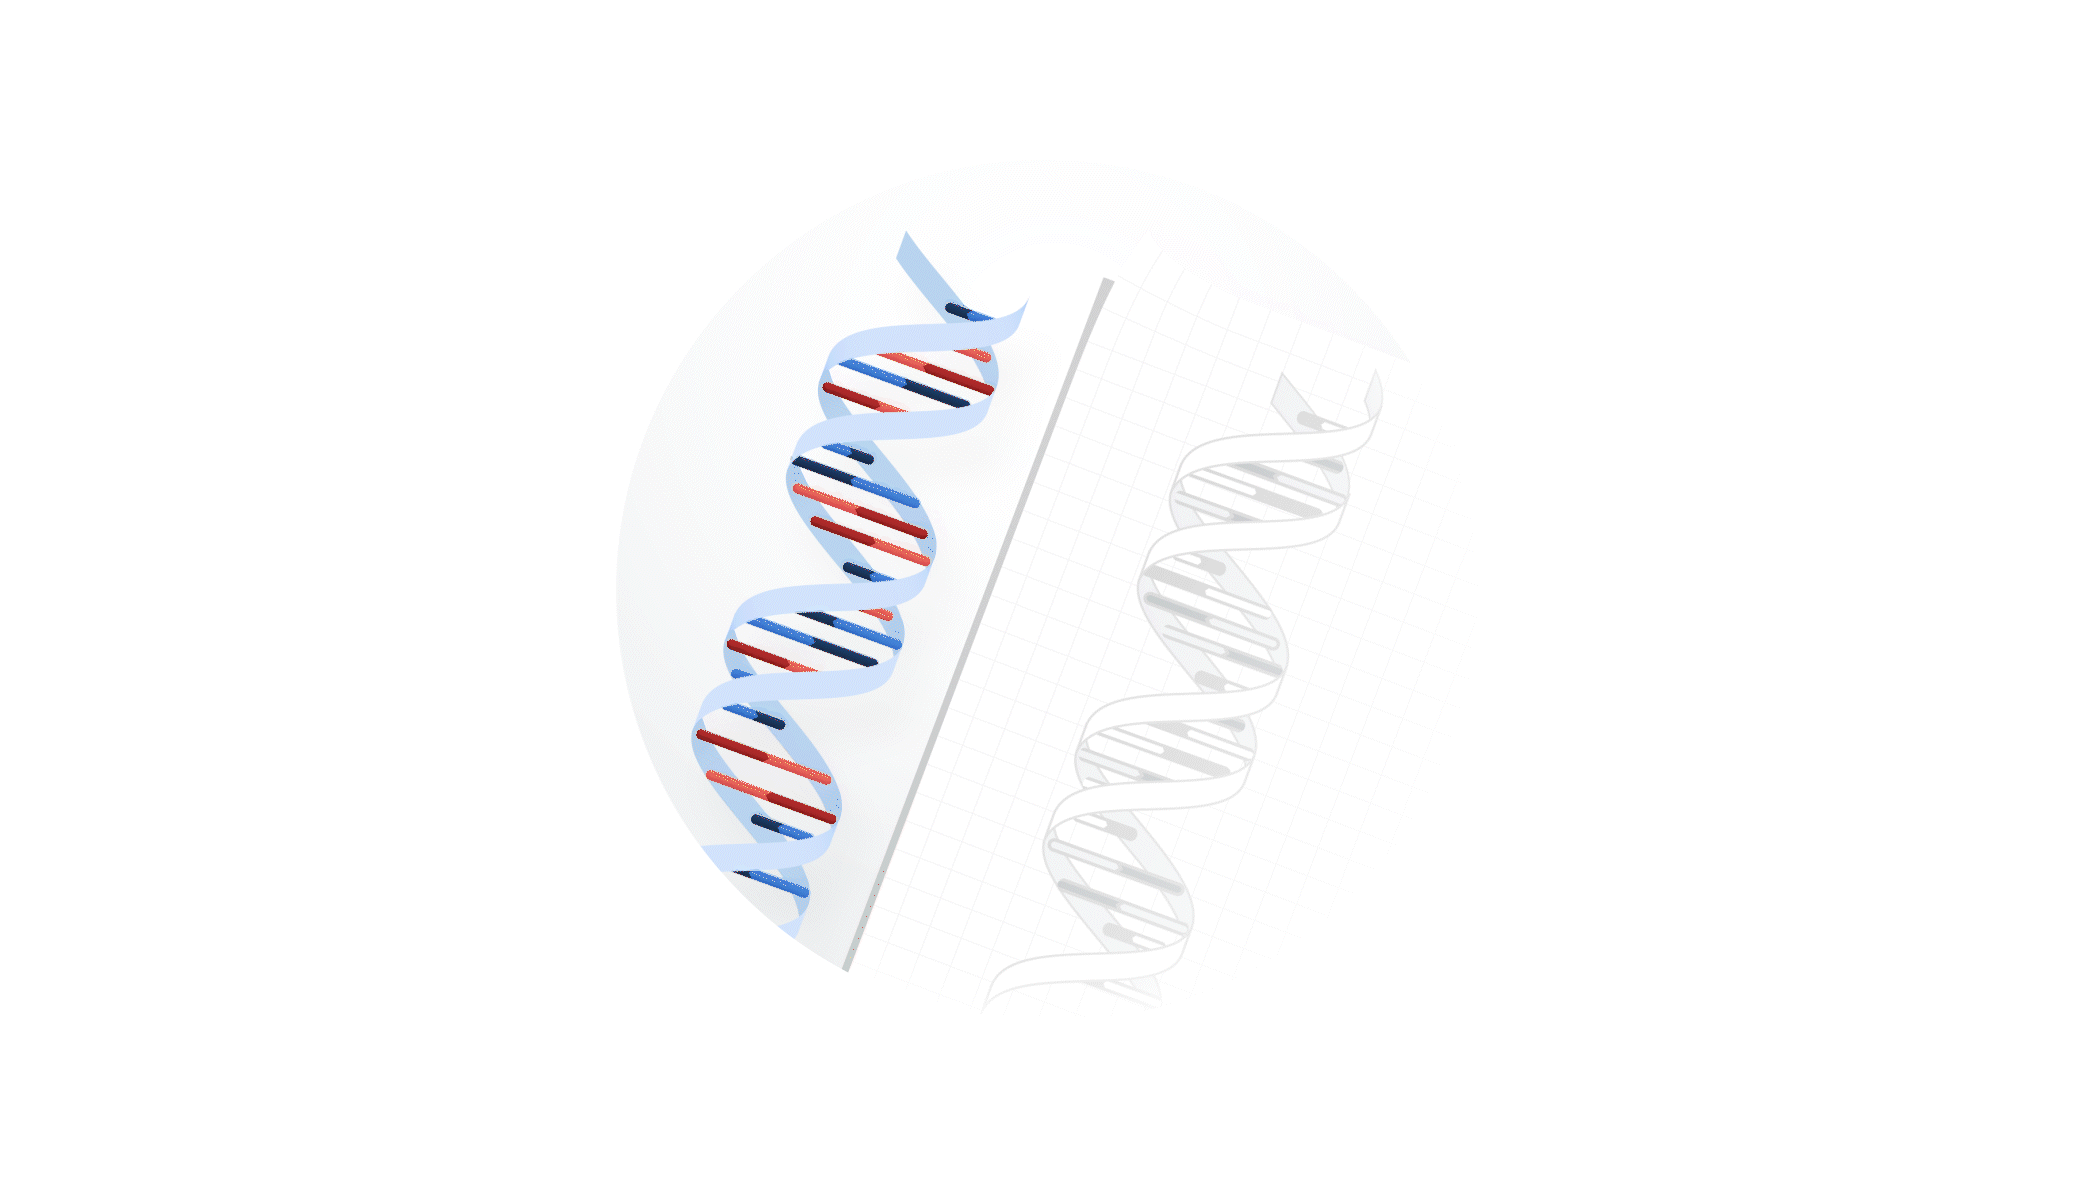 animation of a DNA strand